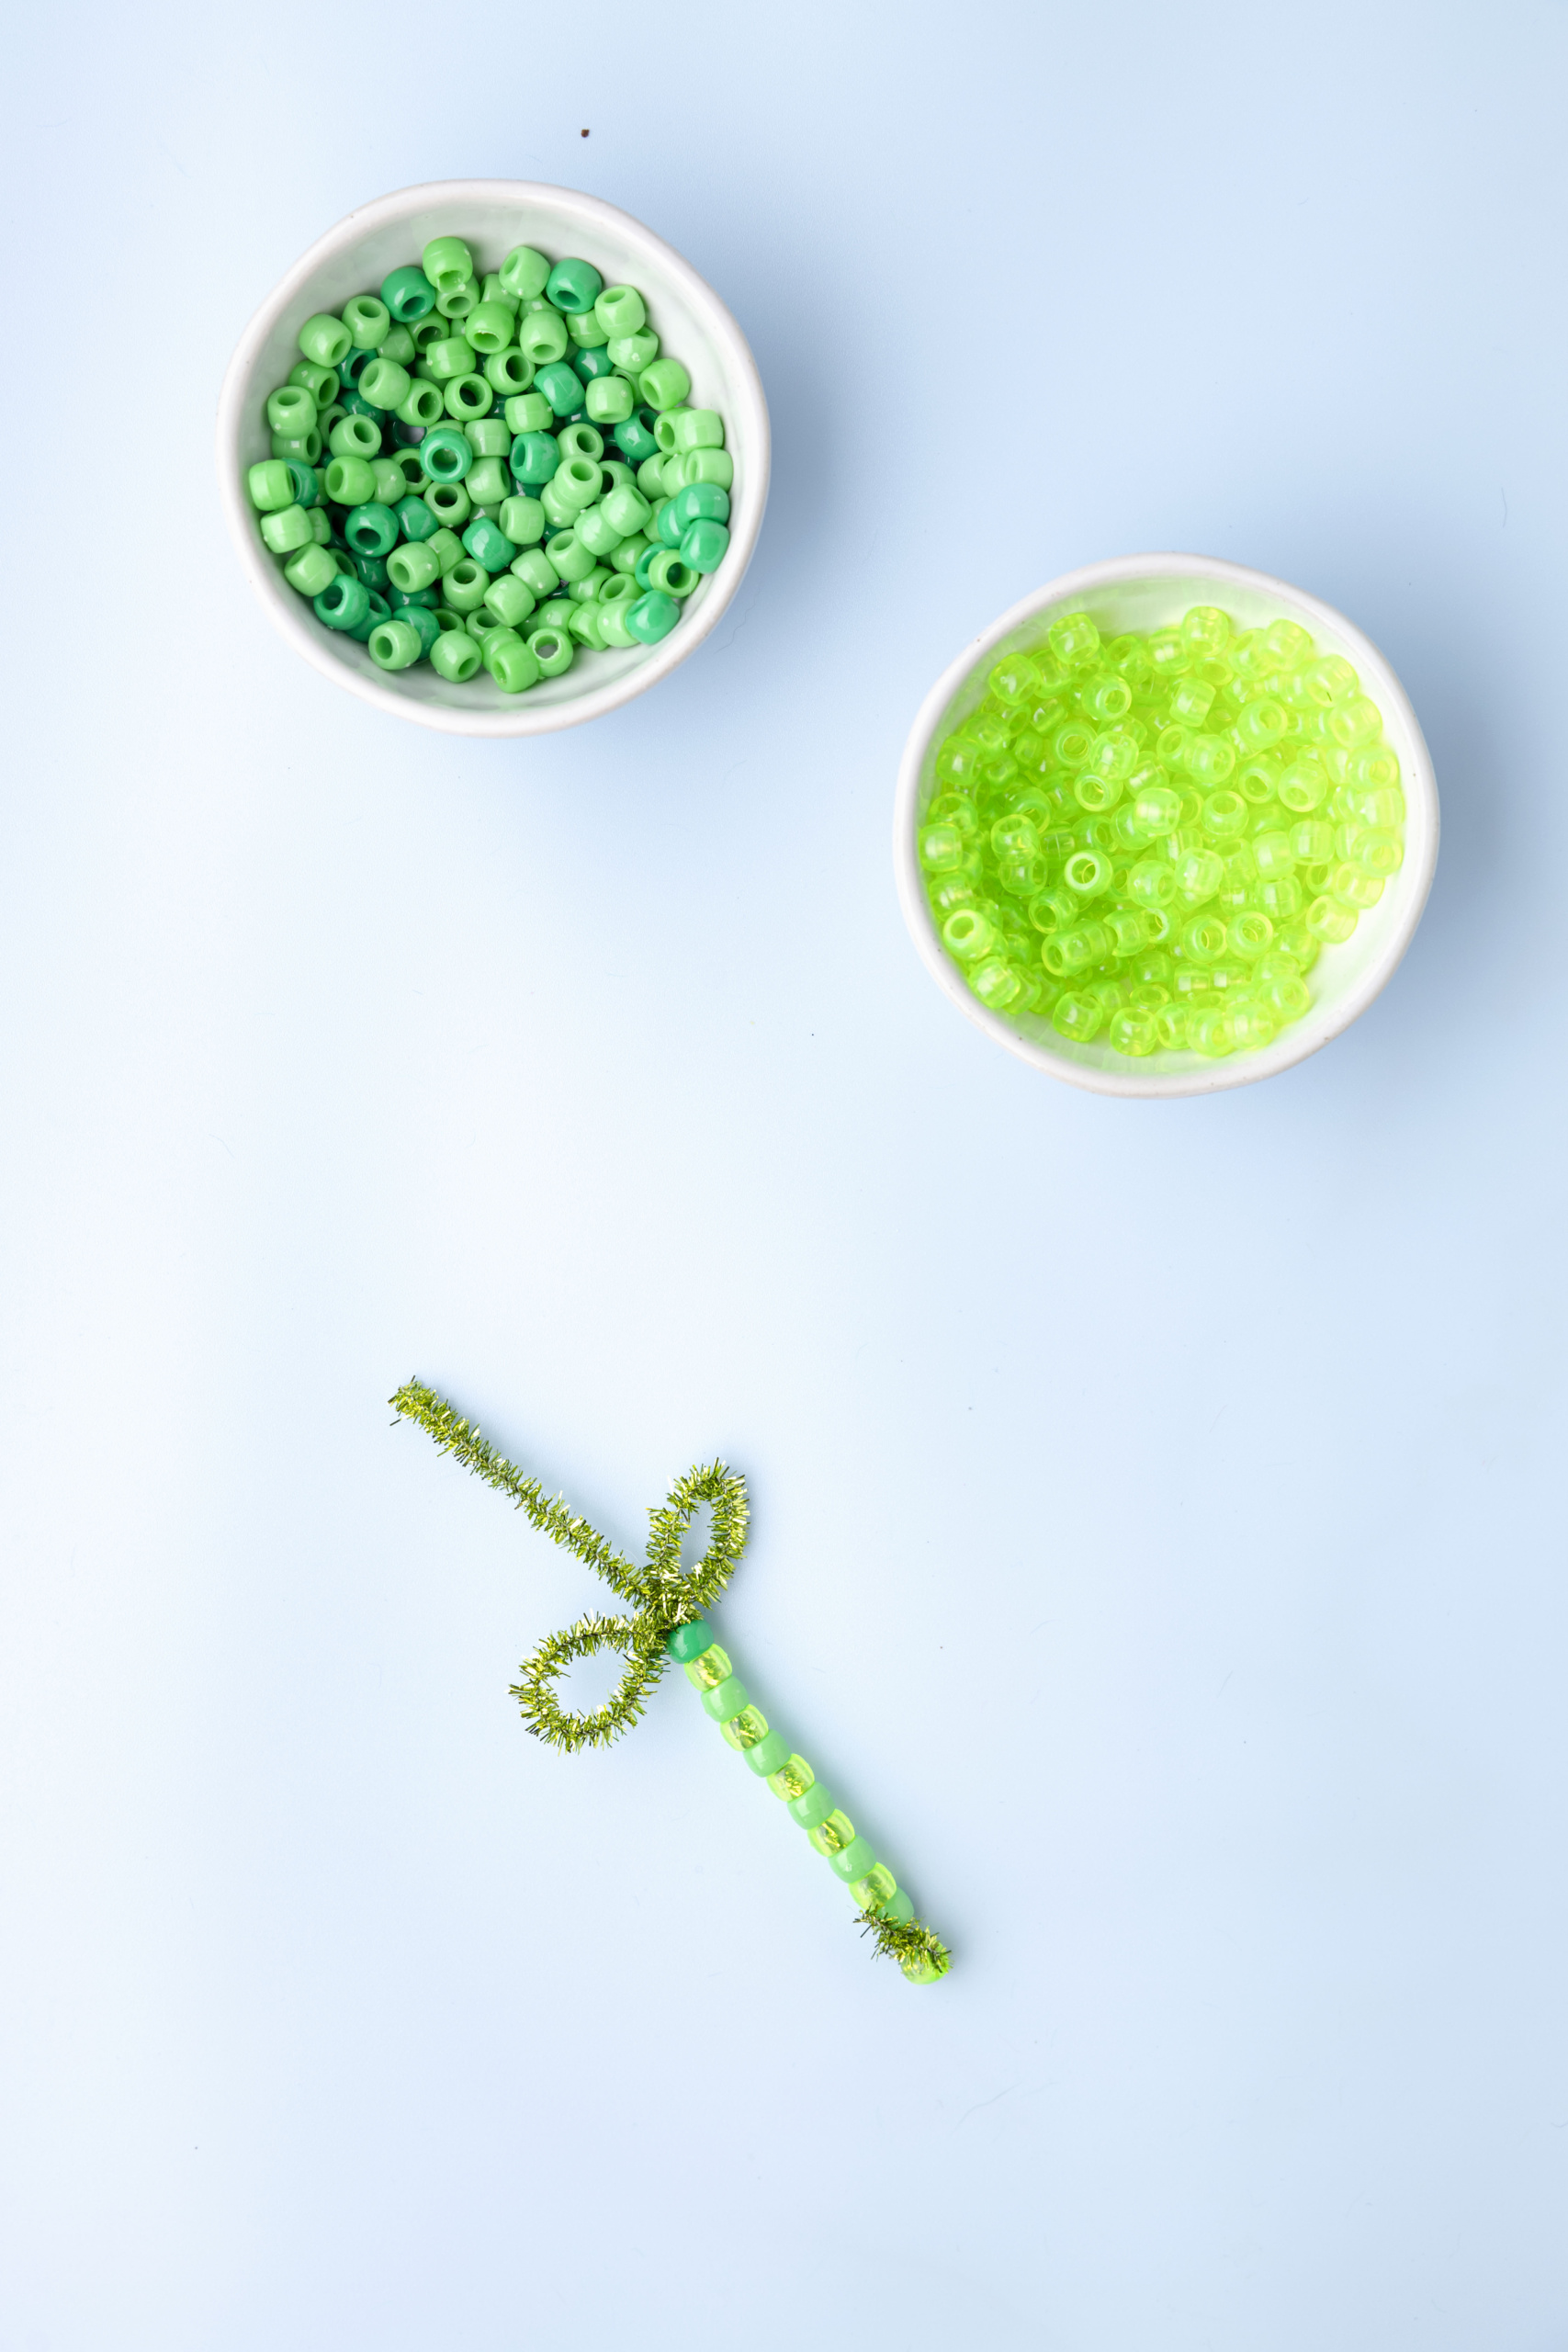 Loop the pipe cleaner above the last bead around your finger and twist to create the leaves